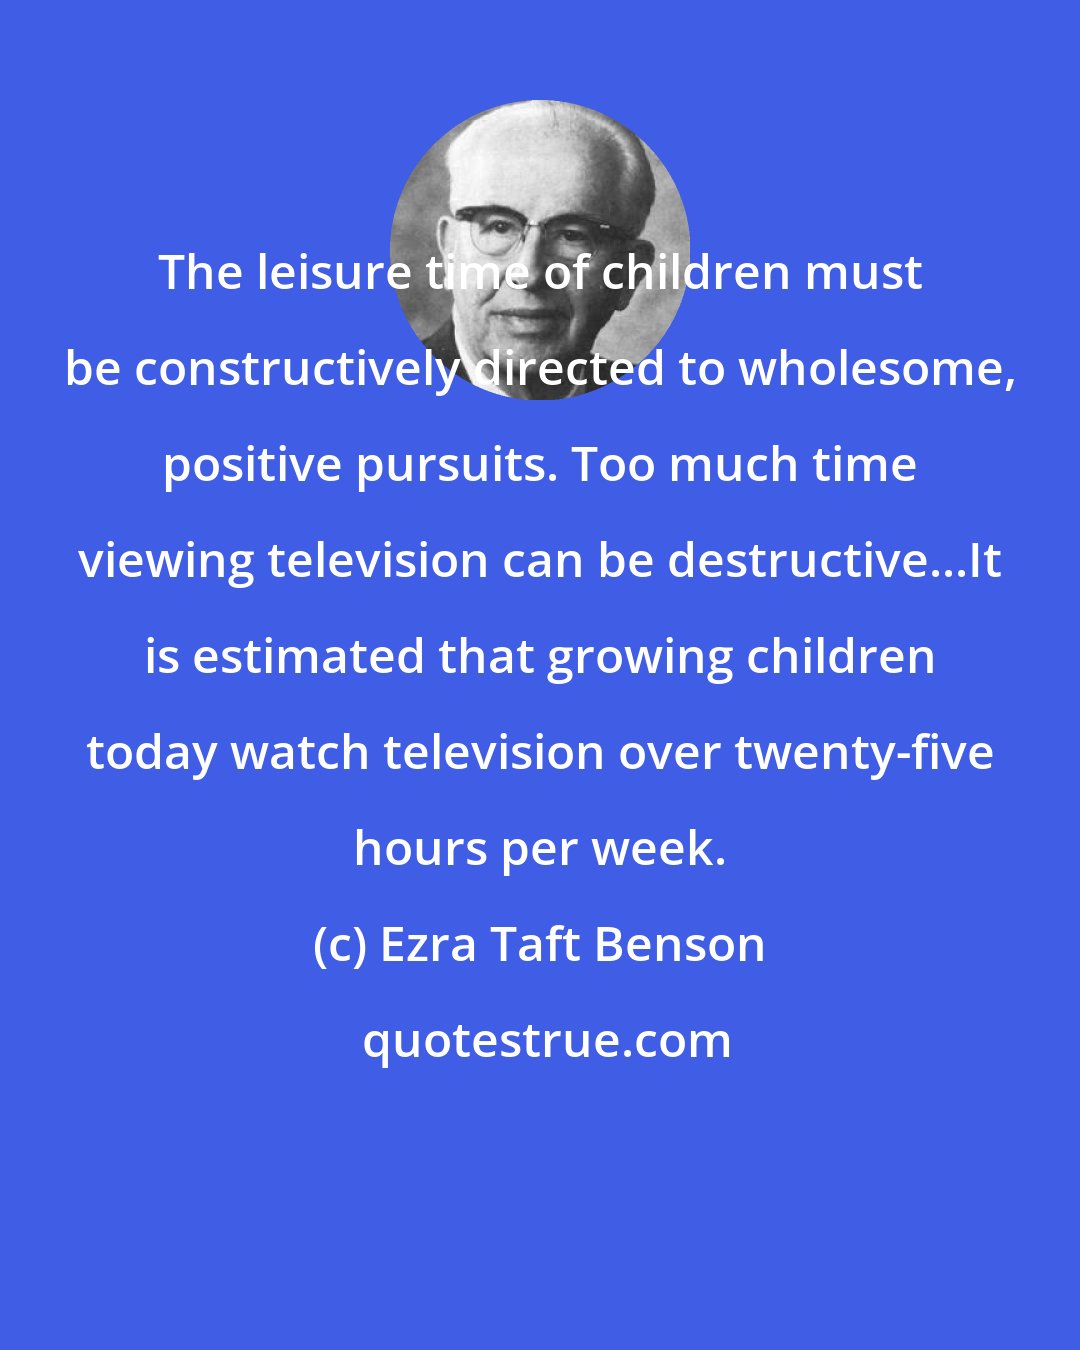 Ezra Taft Benson: The leisure time of children must be constructively directed to wholesome, positive pursuits. Too much time viewing television can be destructive...It is estimated that growing children today watch television over twenty-five hours per week.